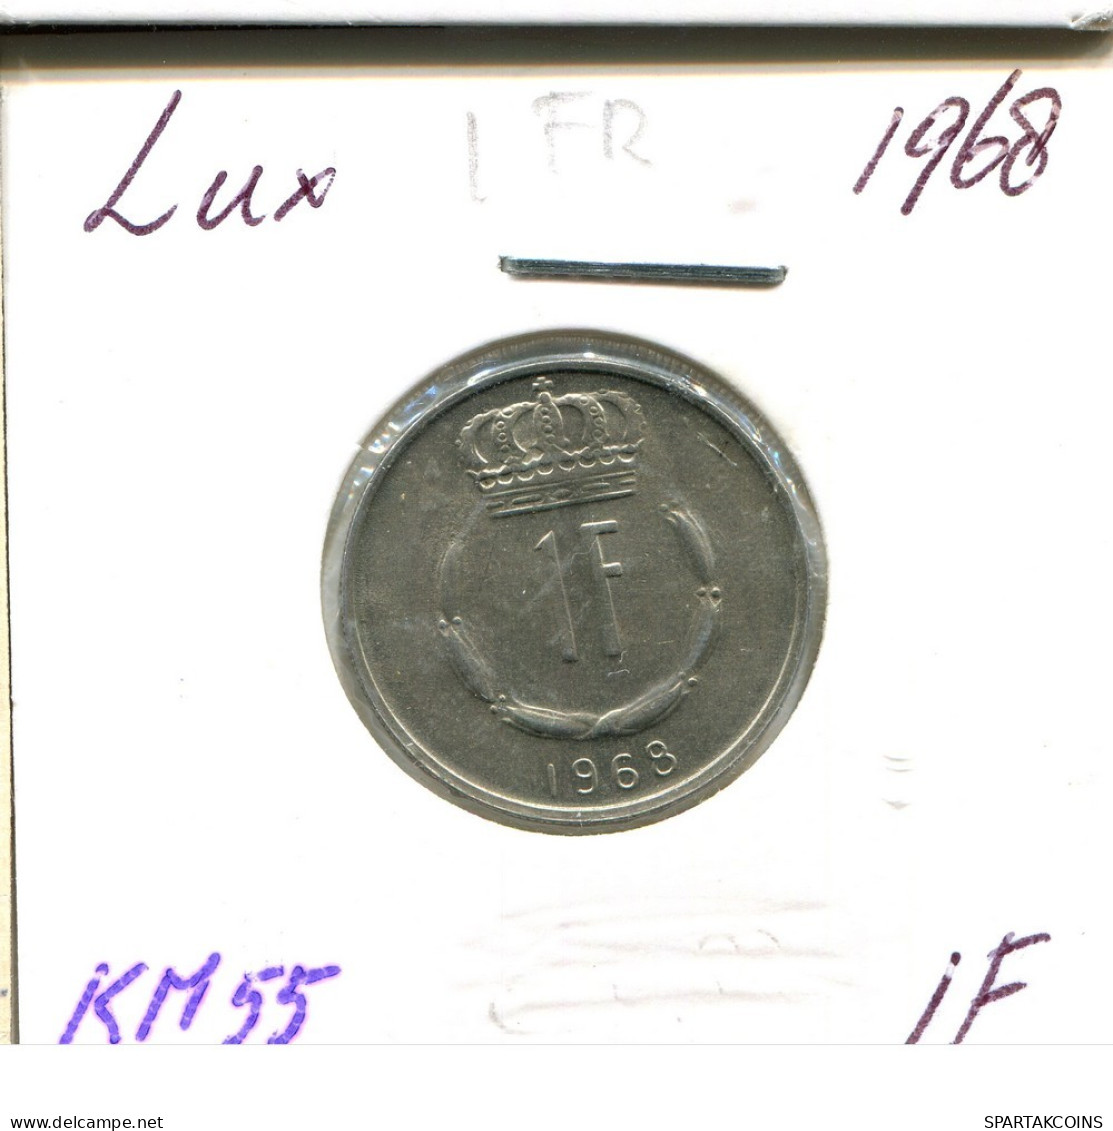 1 FRANC 1968 LUXEMBOURG Coin #AT208.U.A - Luxembourg